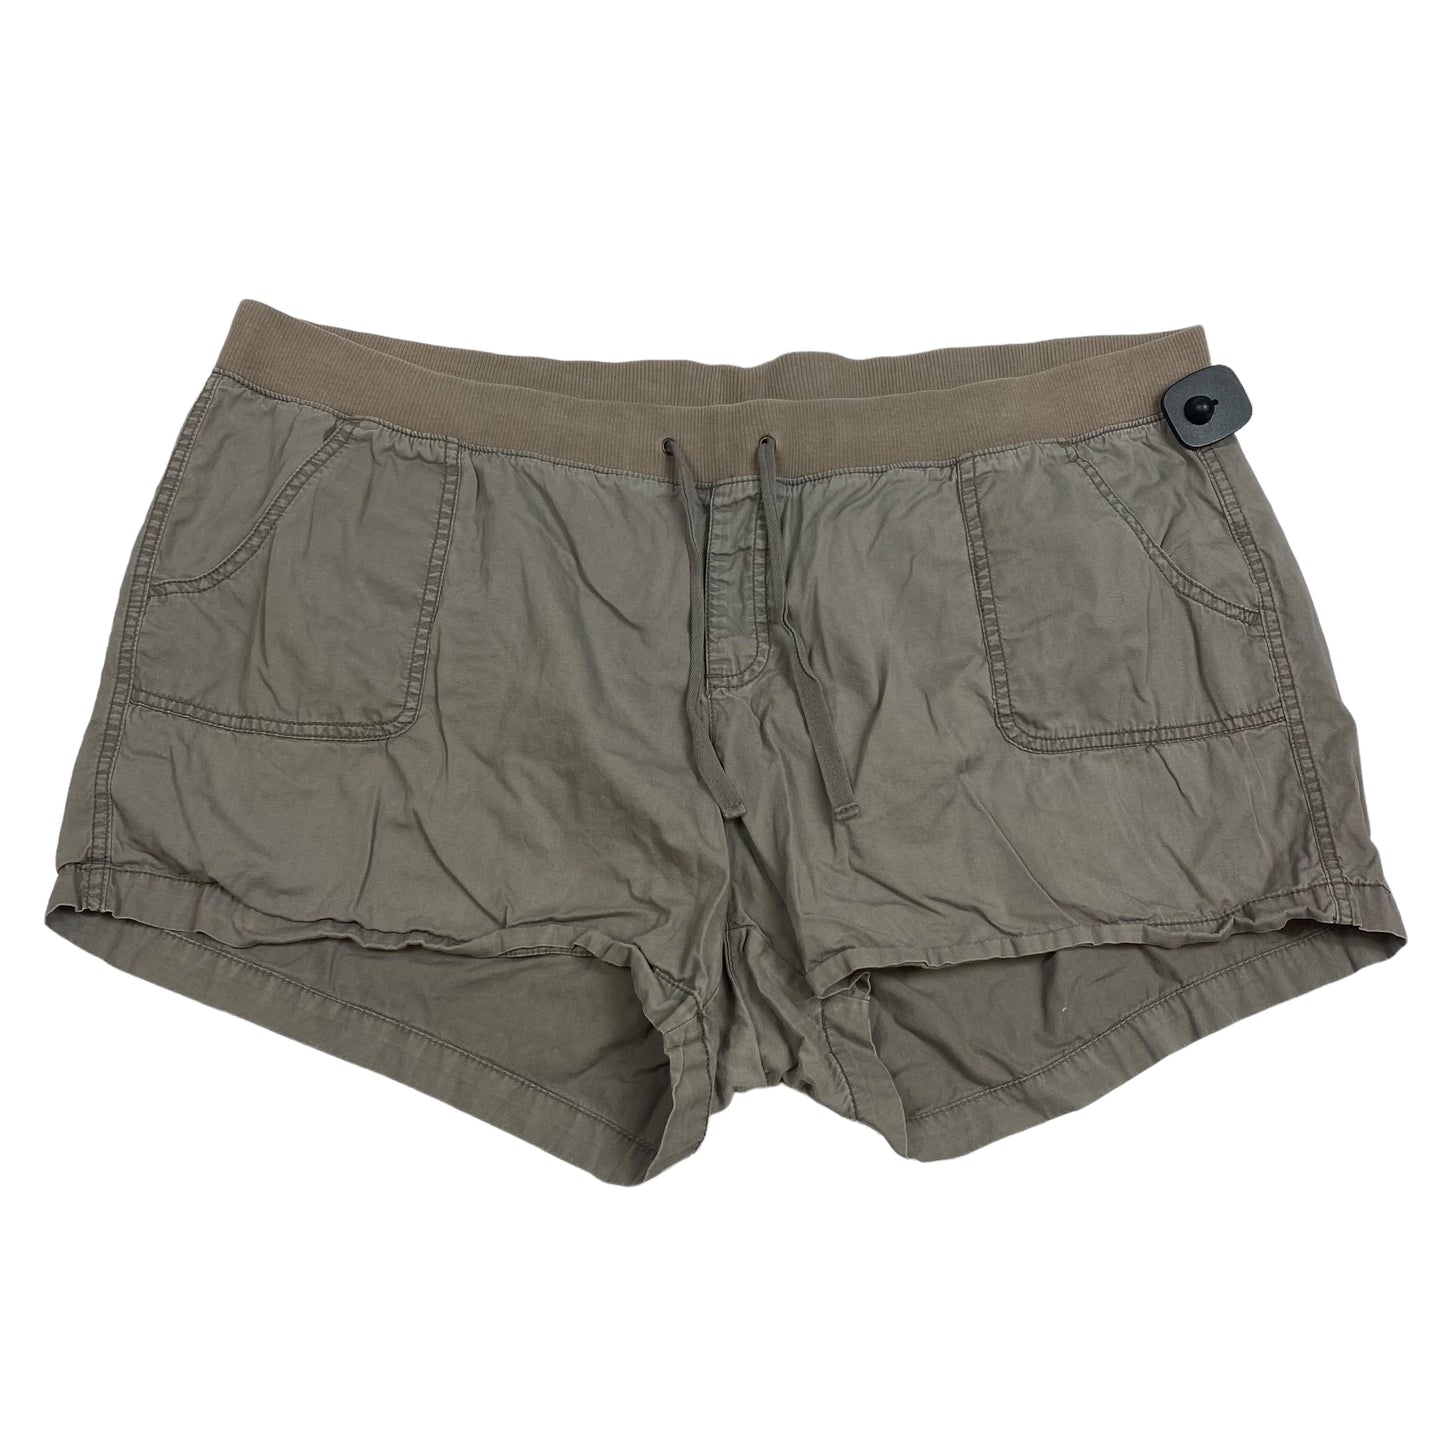 Brown Shorts Old Navy, Size Xxl